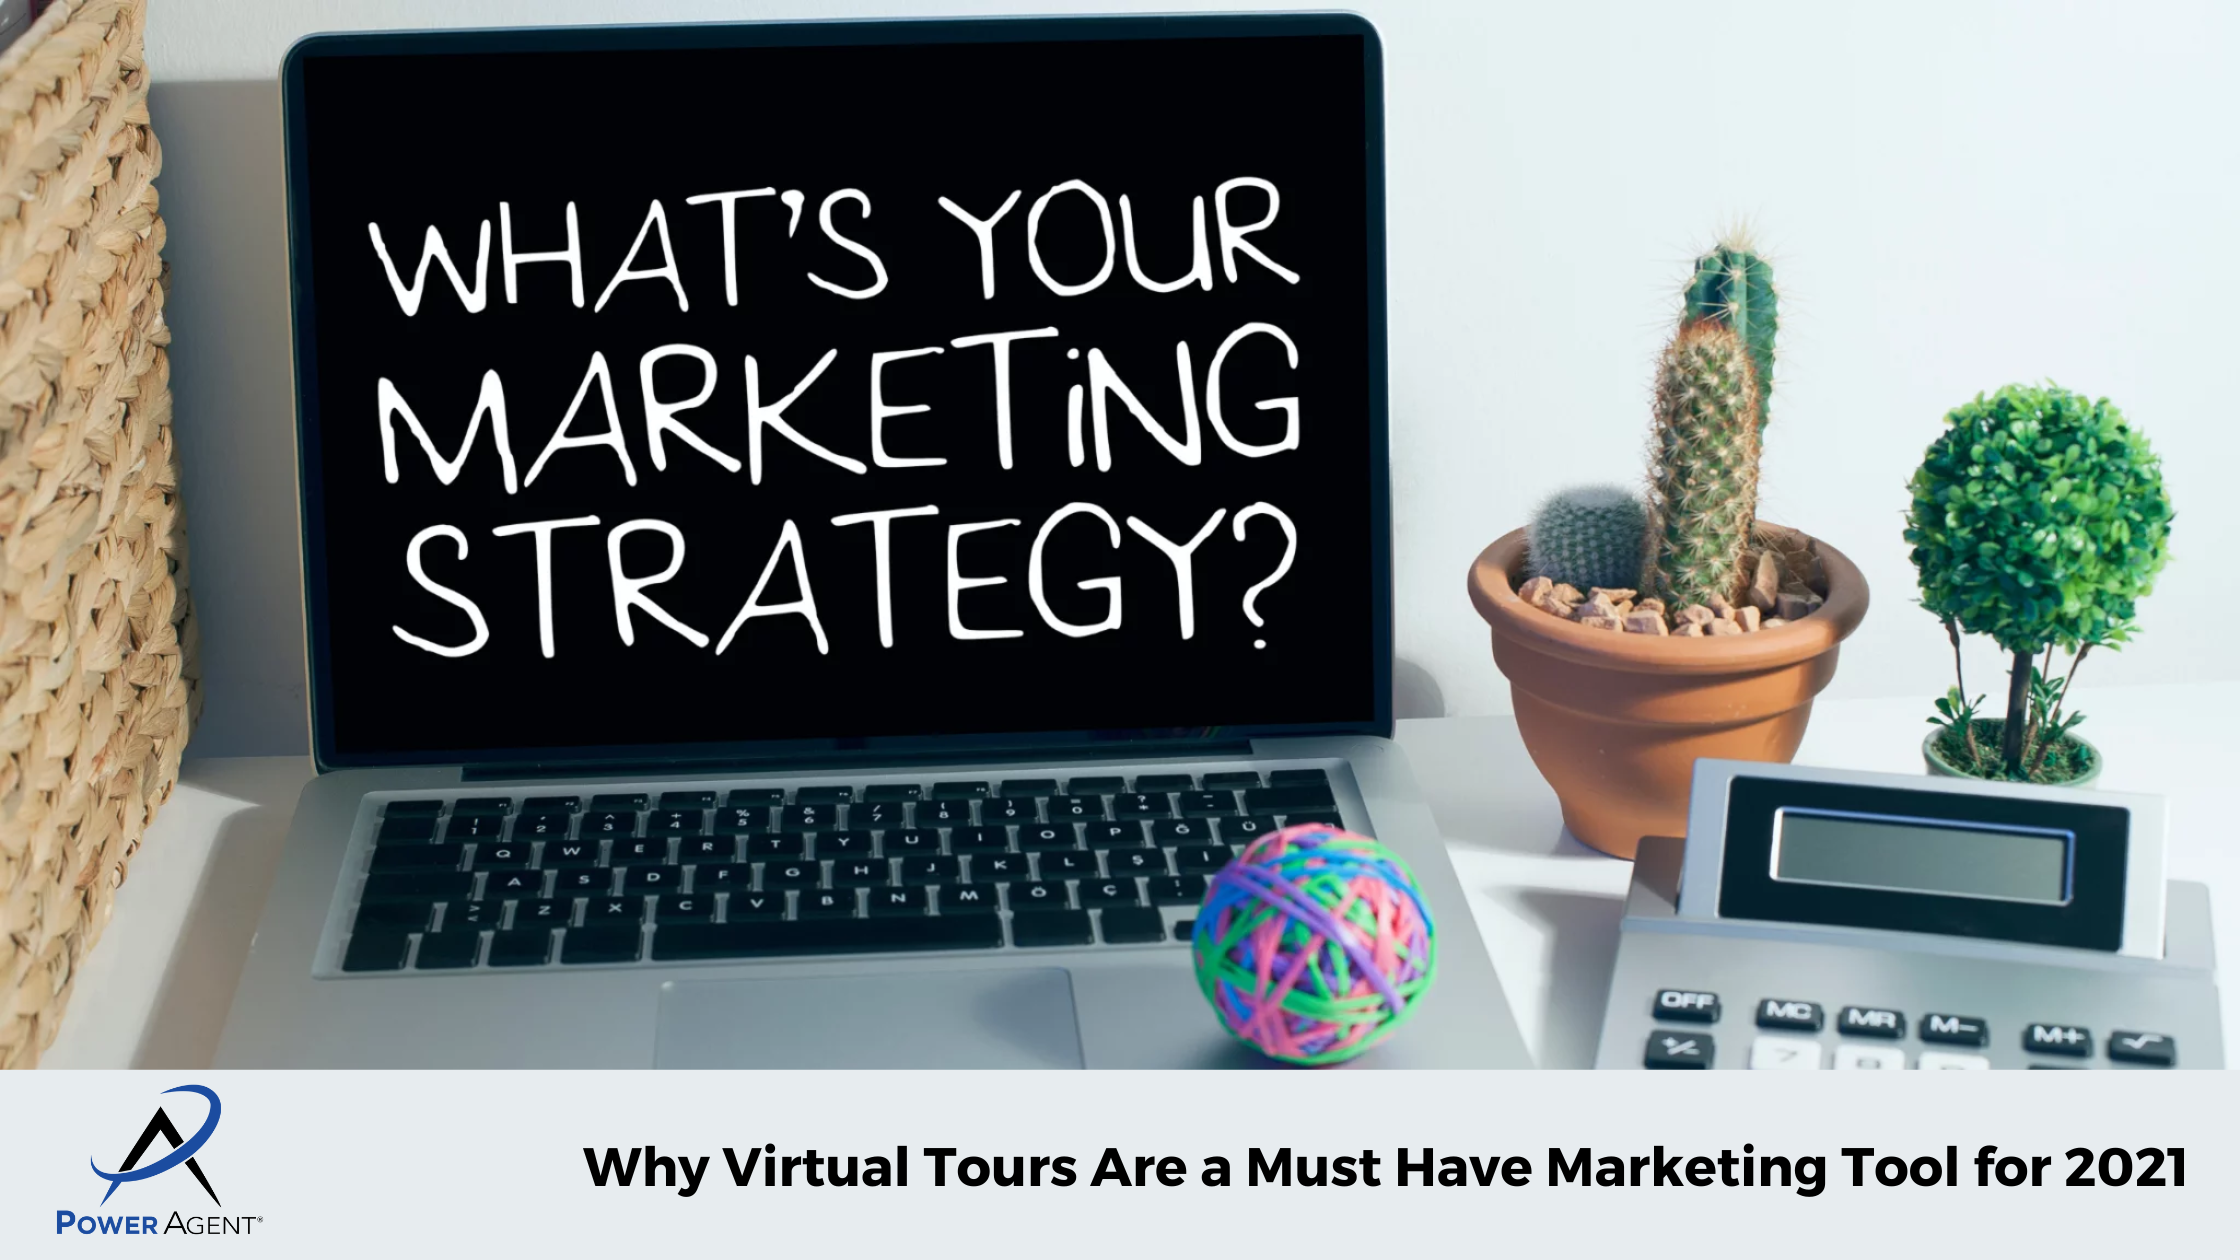 Why Virtual Tours Are a Must Have Marketing Tool for 2021